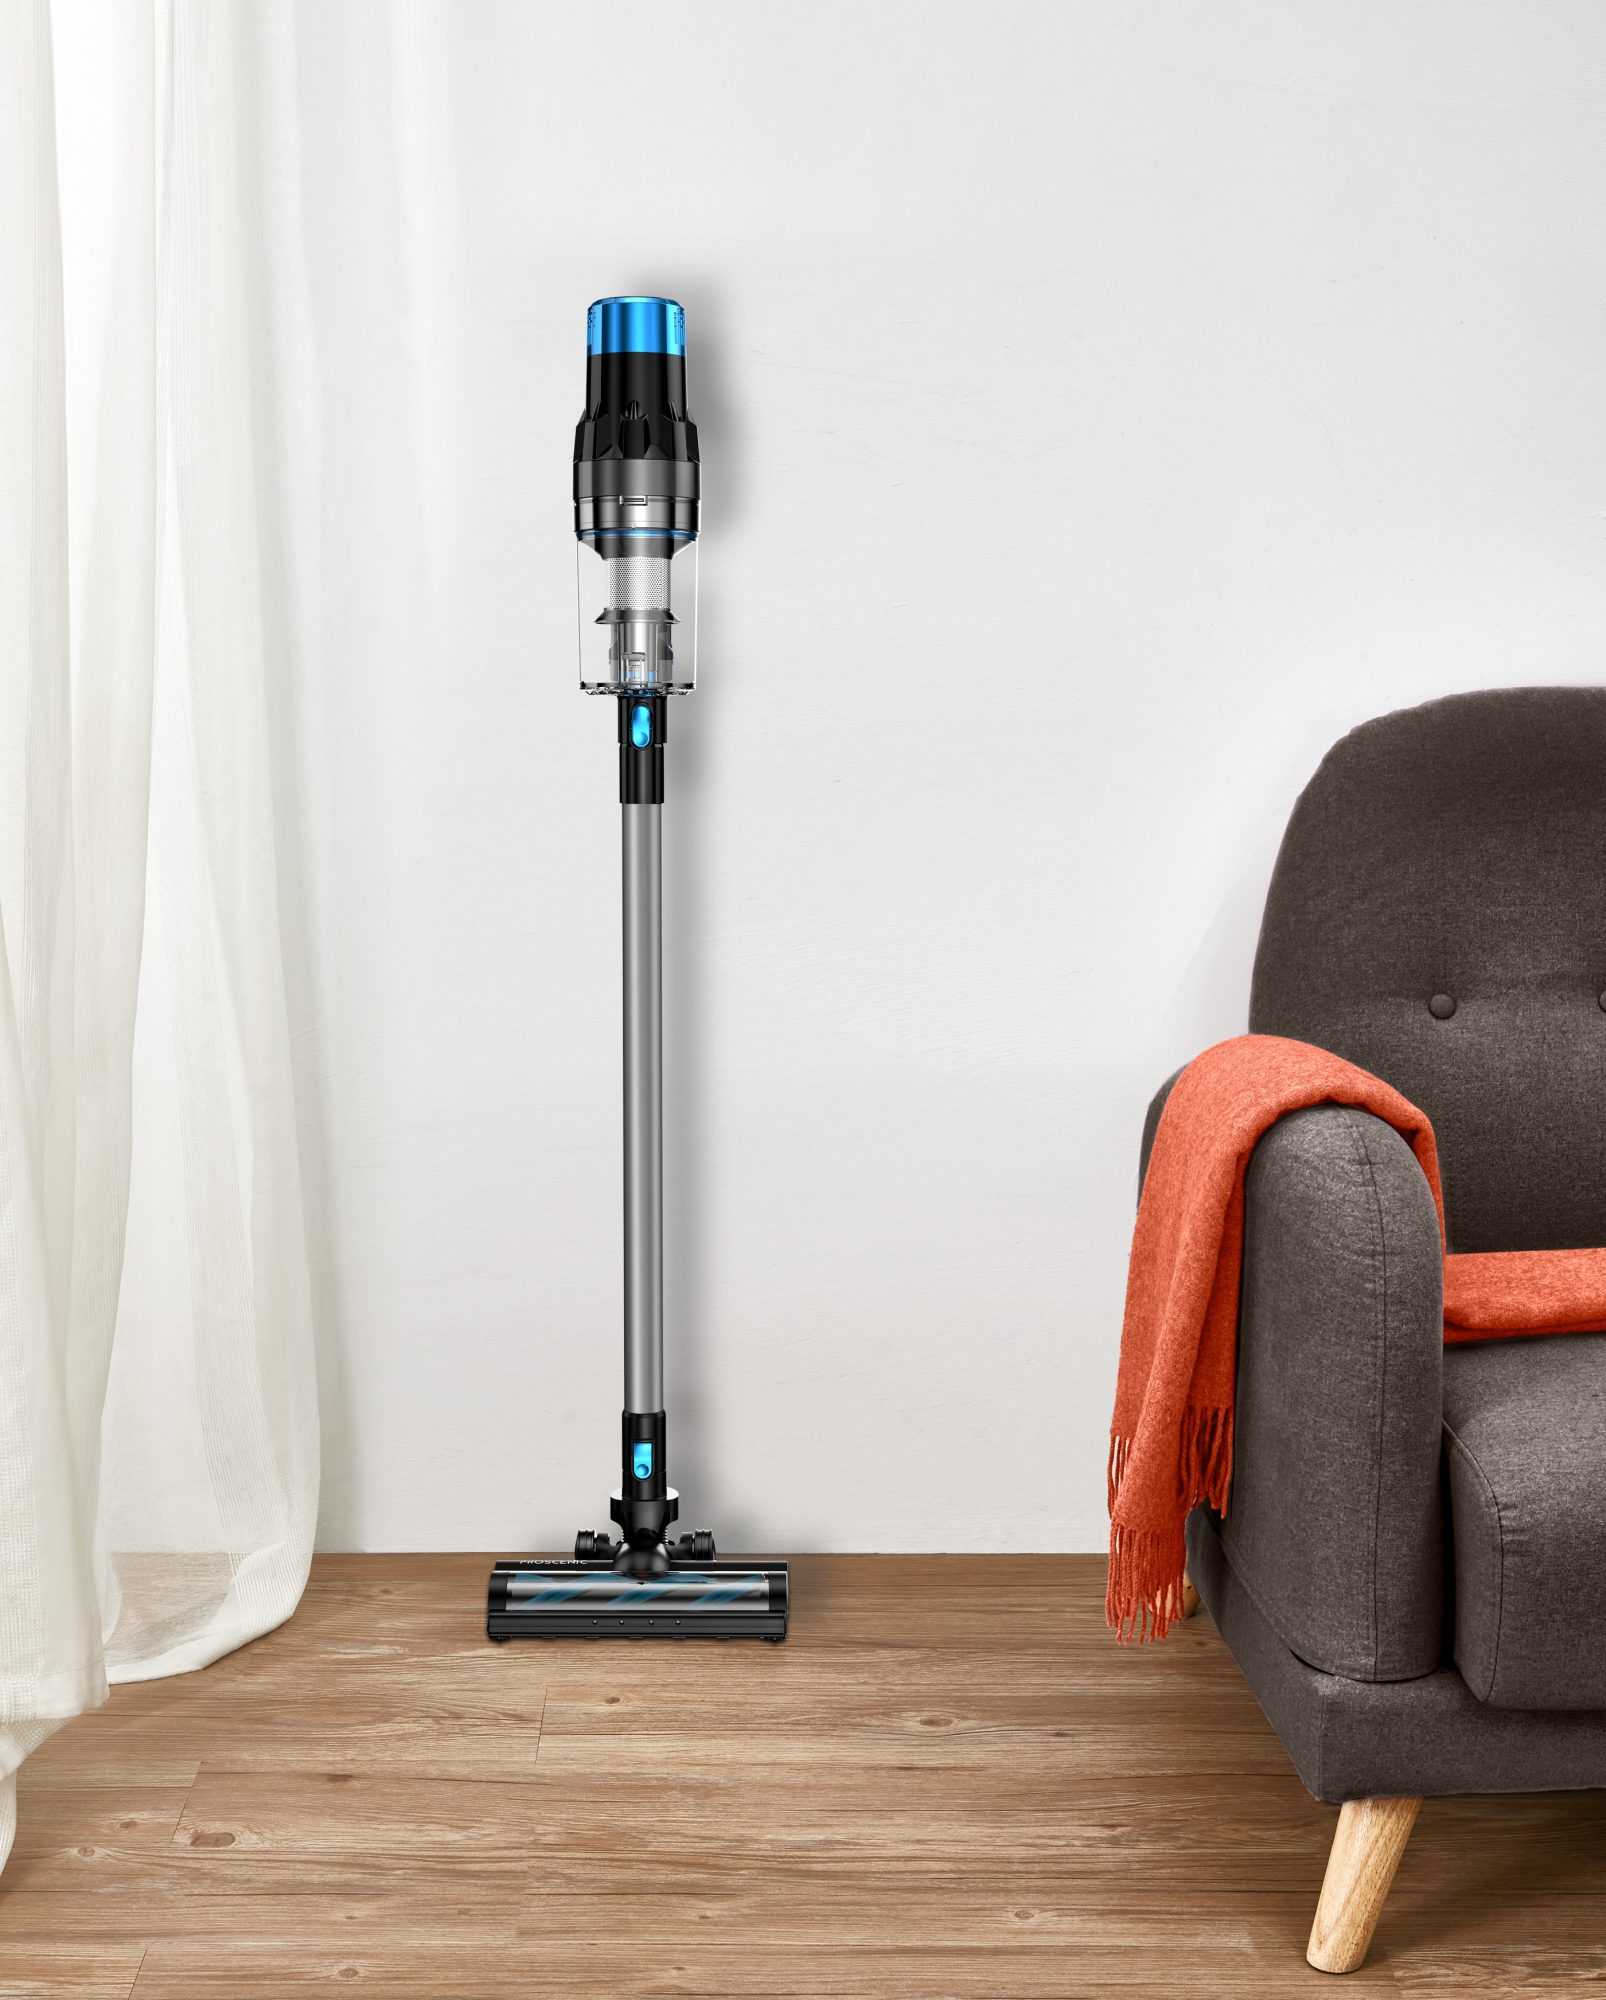 Proscenic presented the new P11 Smart vacuum cleaner